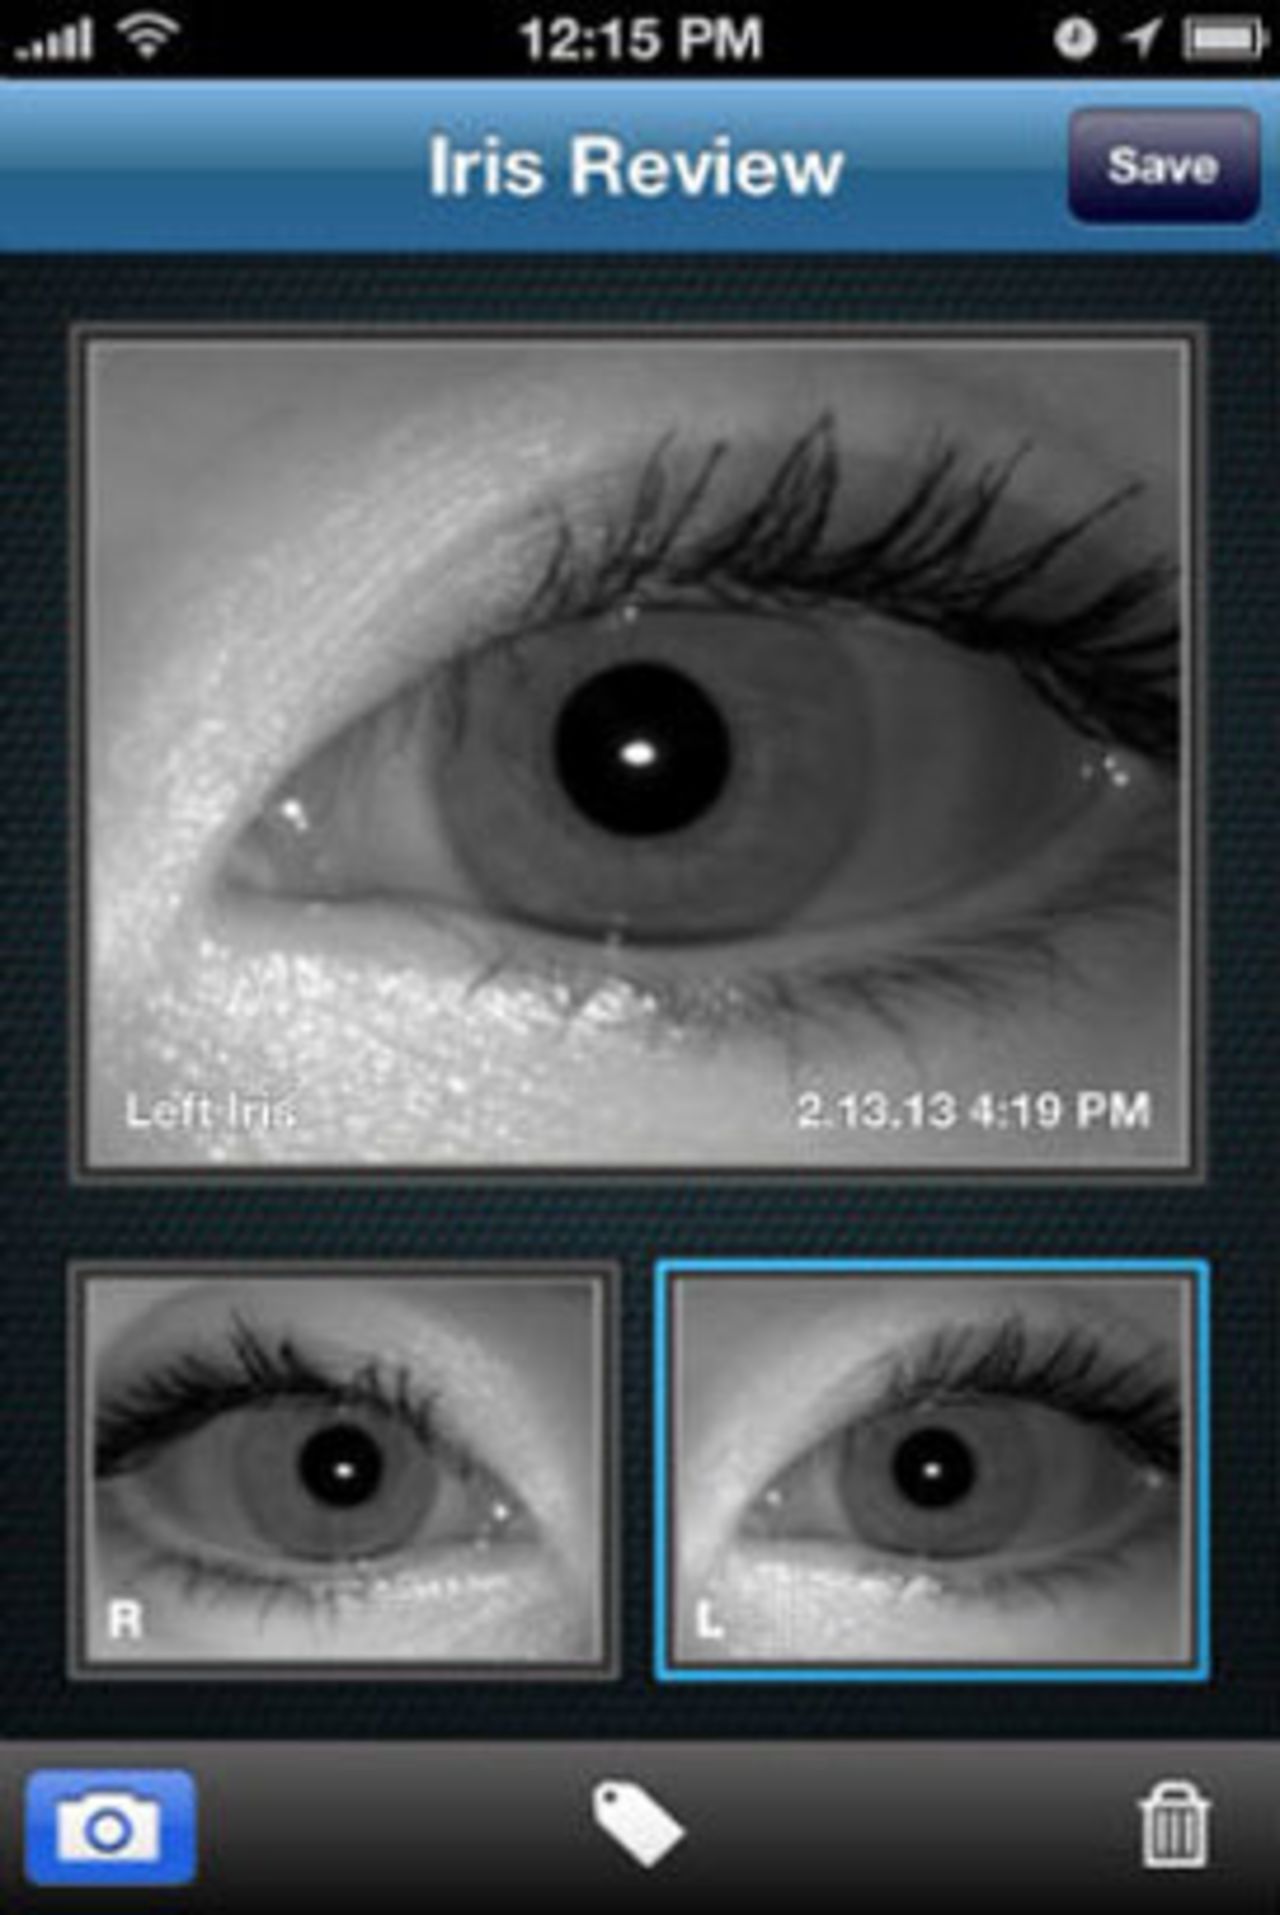 A screen grab from the AOptrix eye-scanner facility as captured via an iPhone camera.